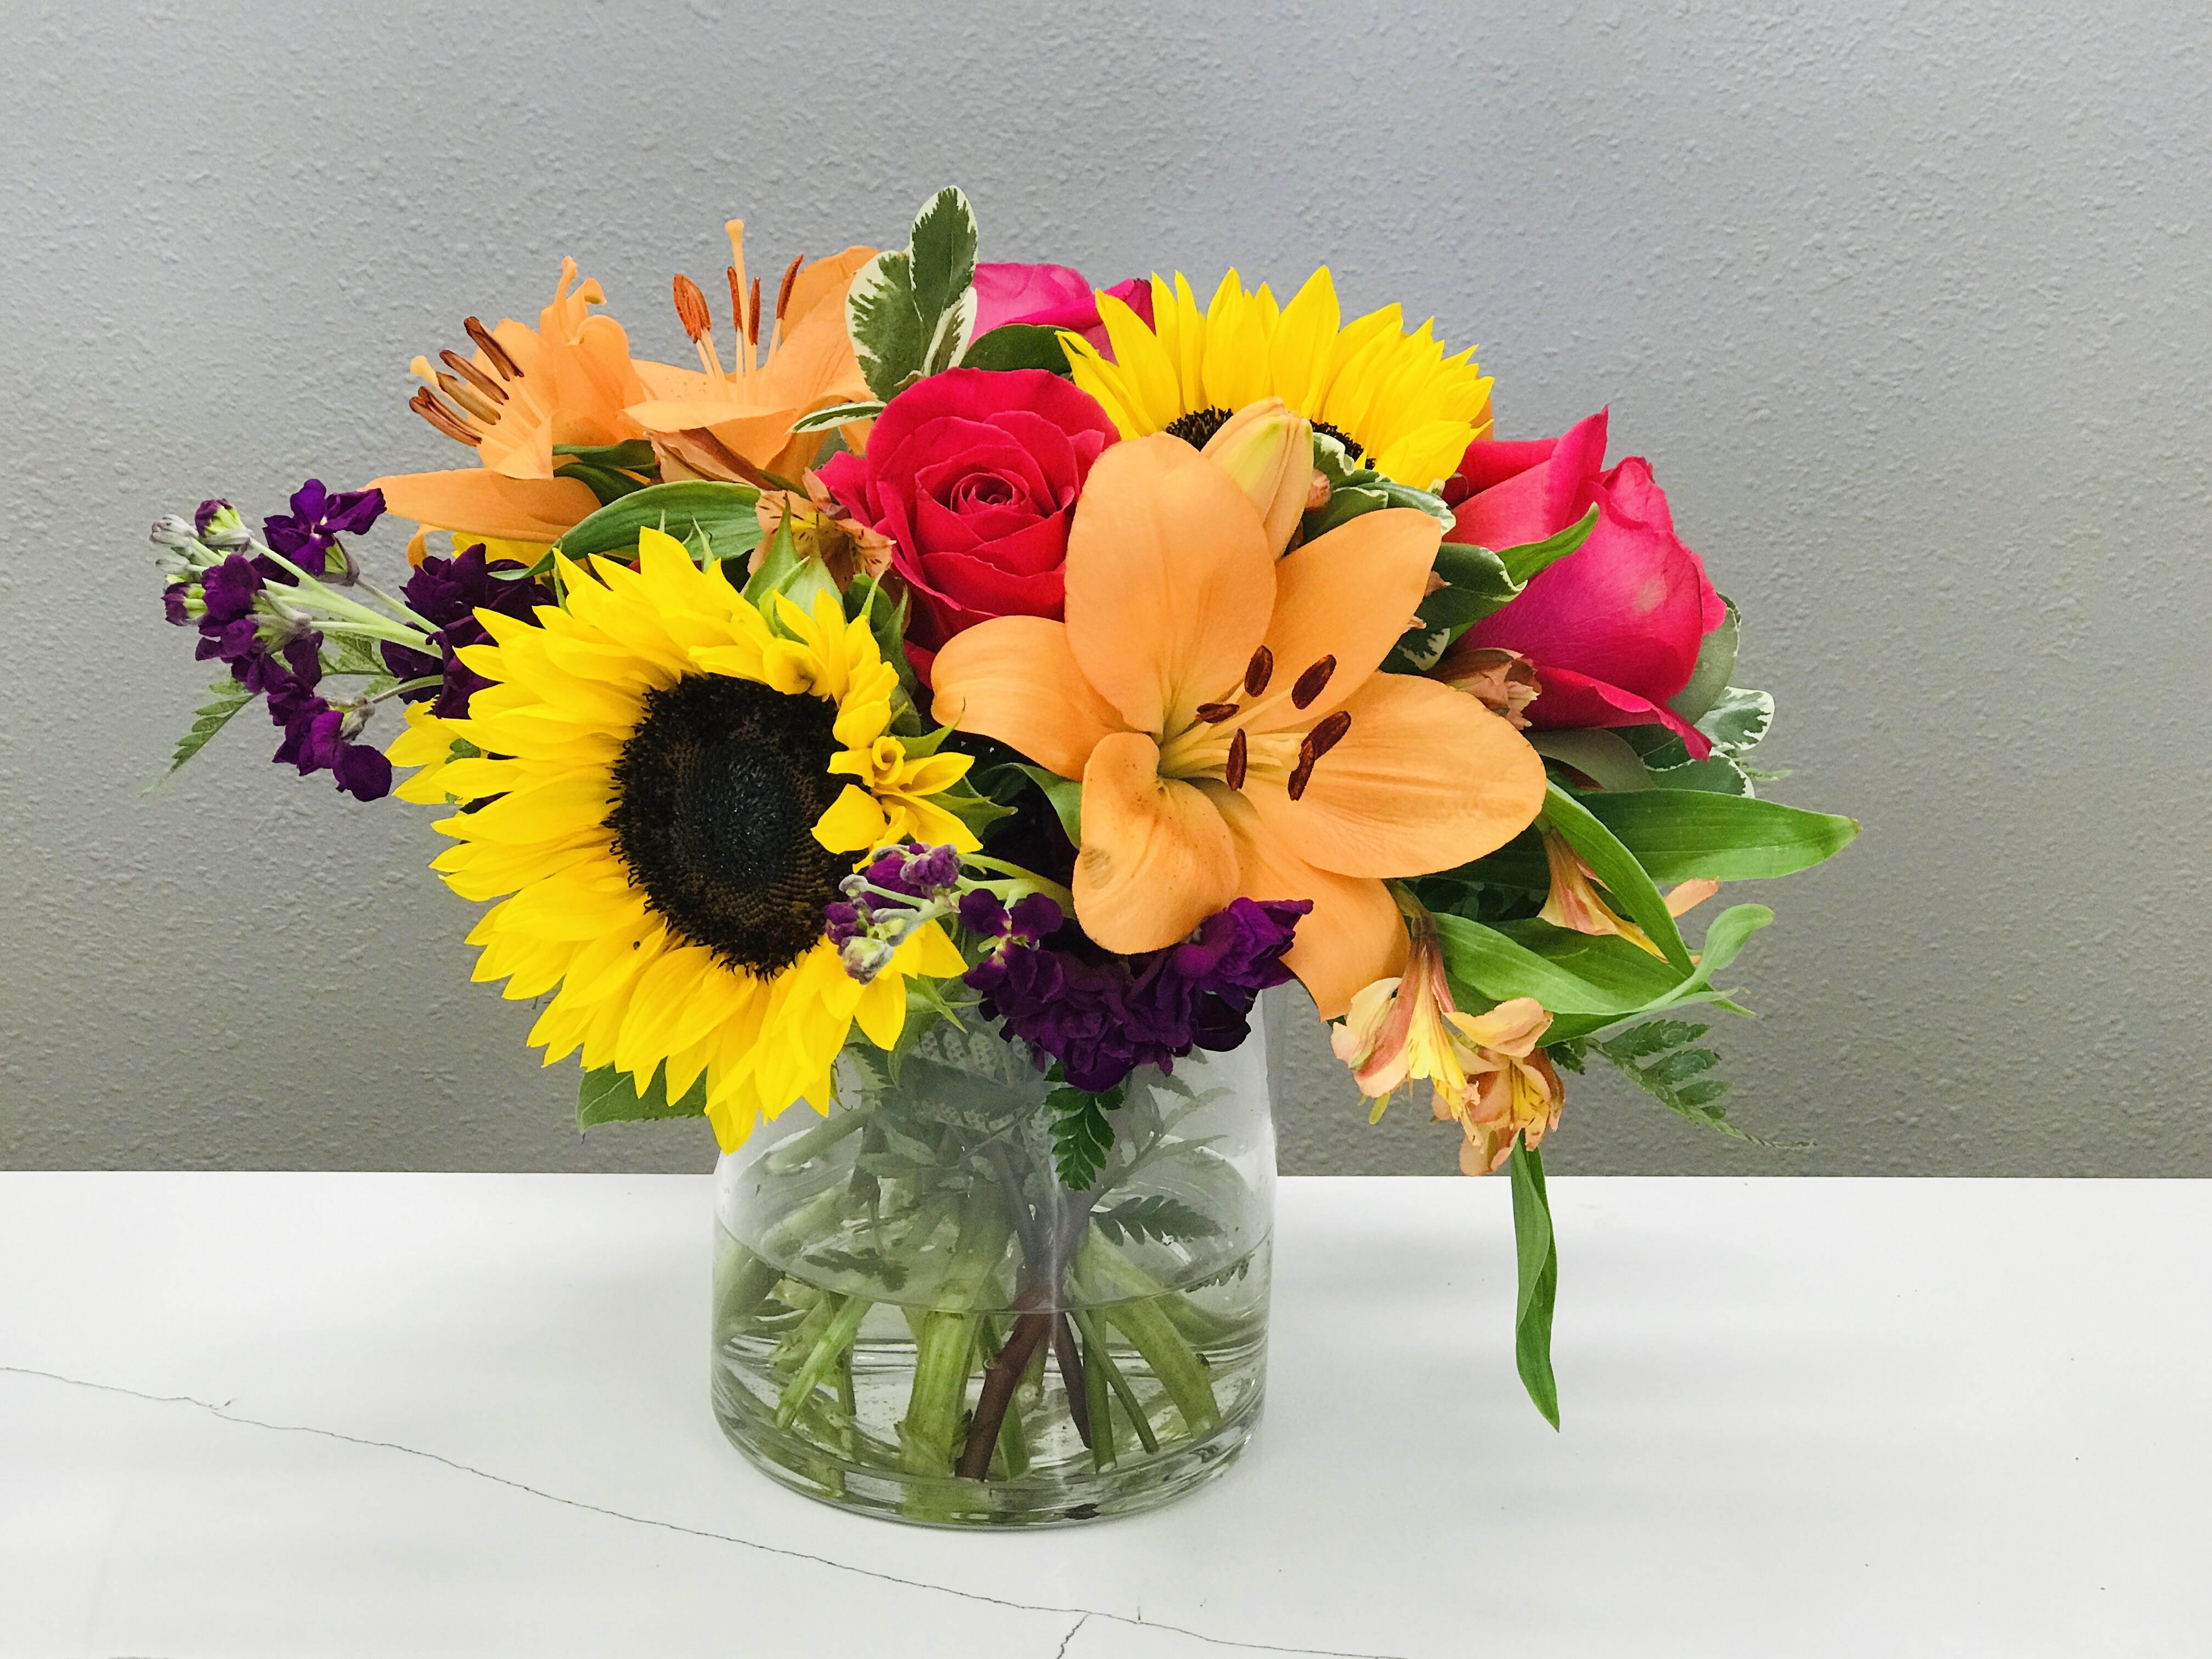 Short and Sweet - Happy happy flowers in a vibrant assortment of colors to brighten anyone's day!